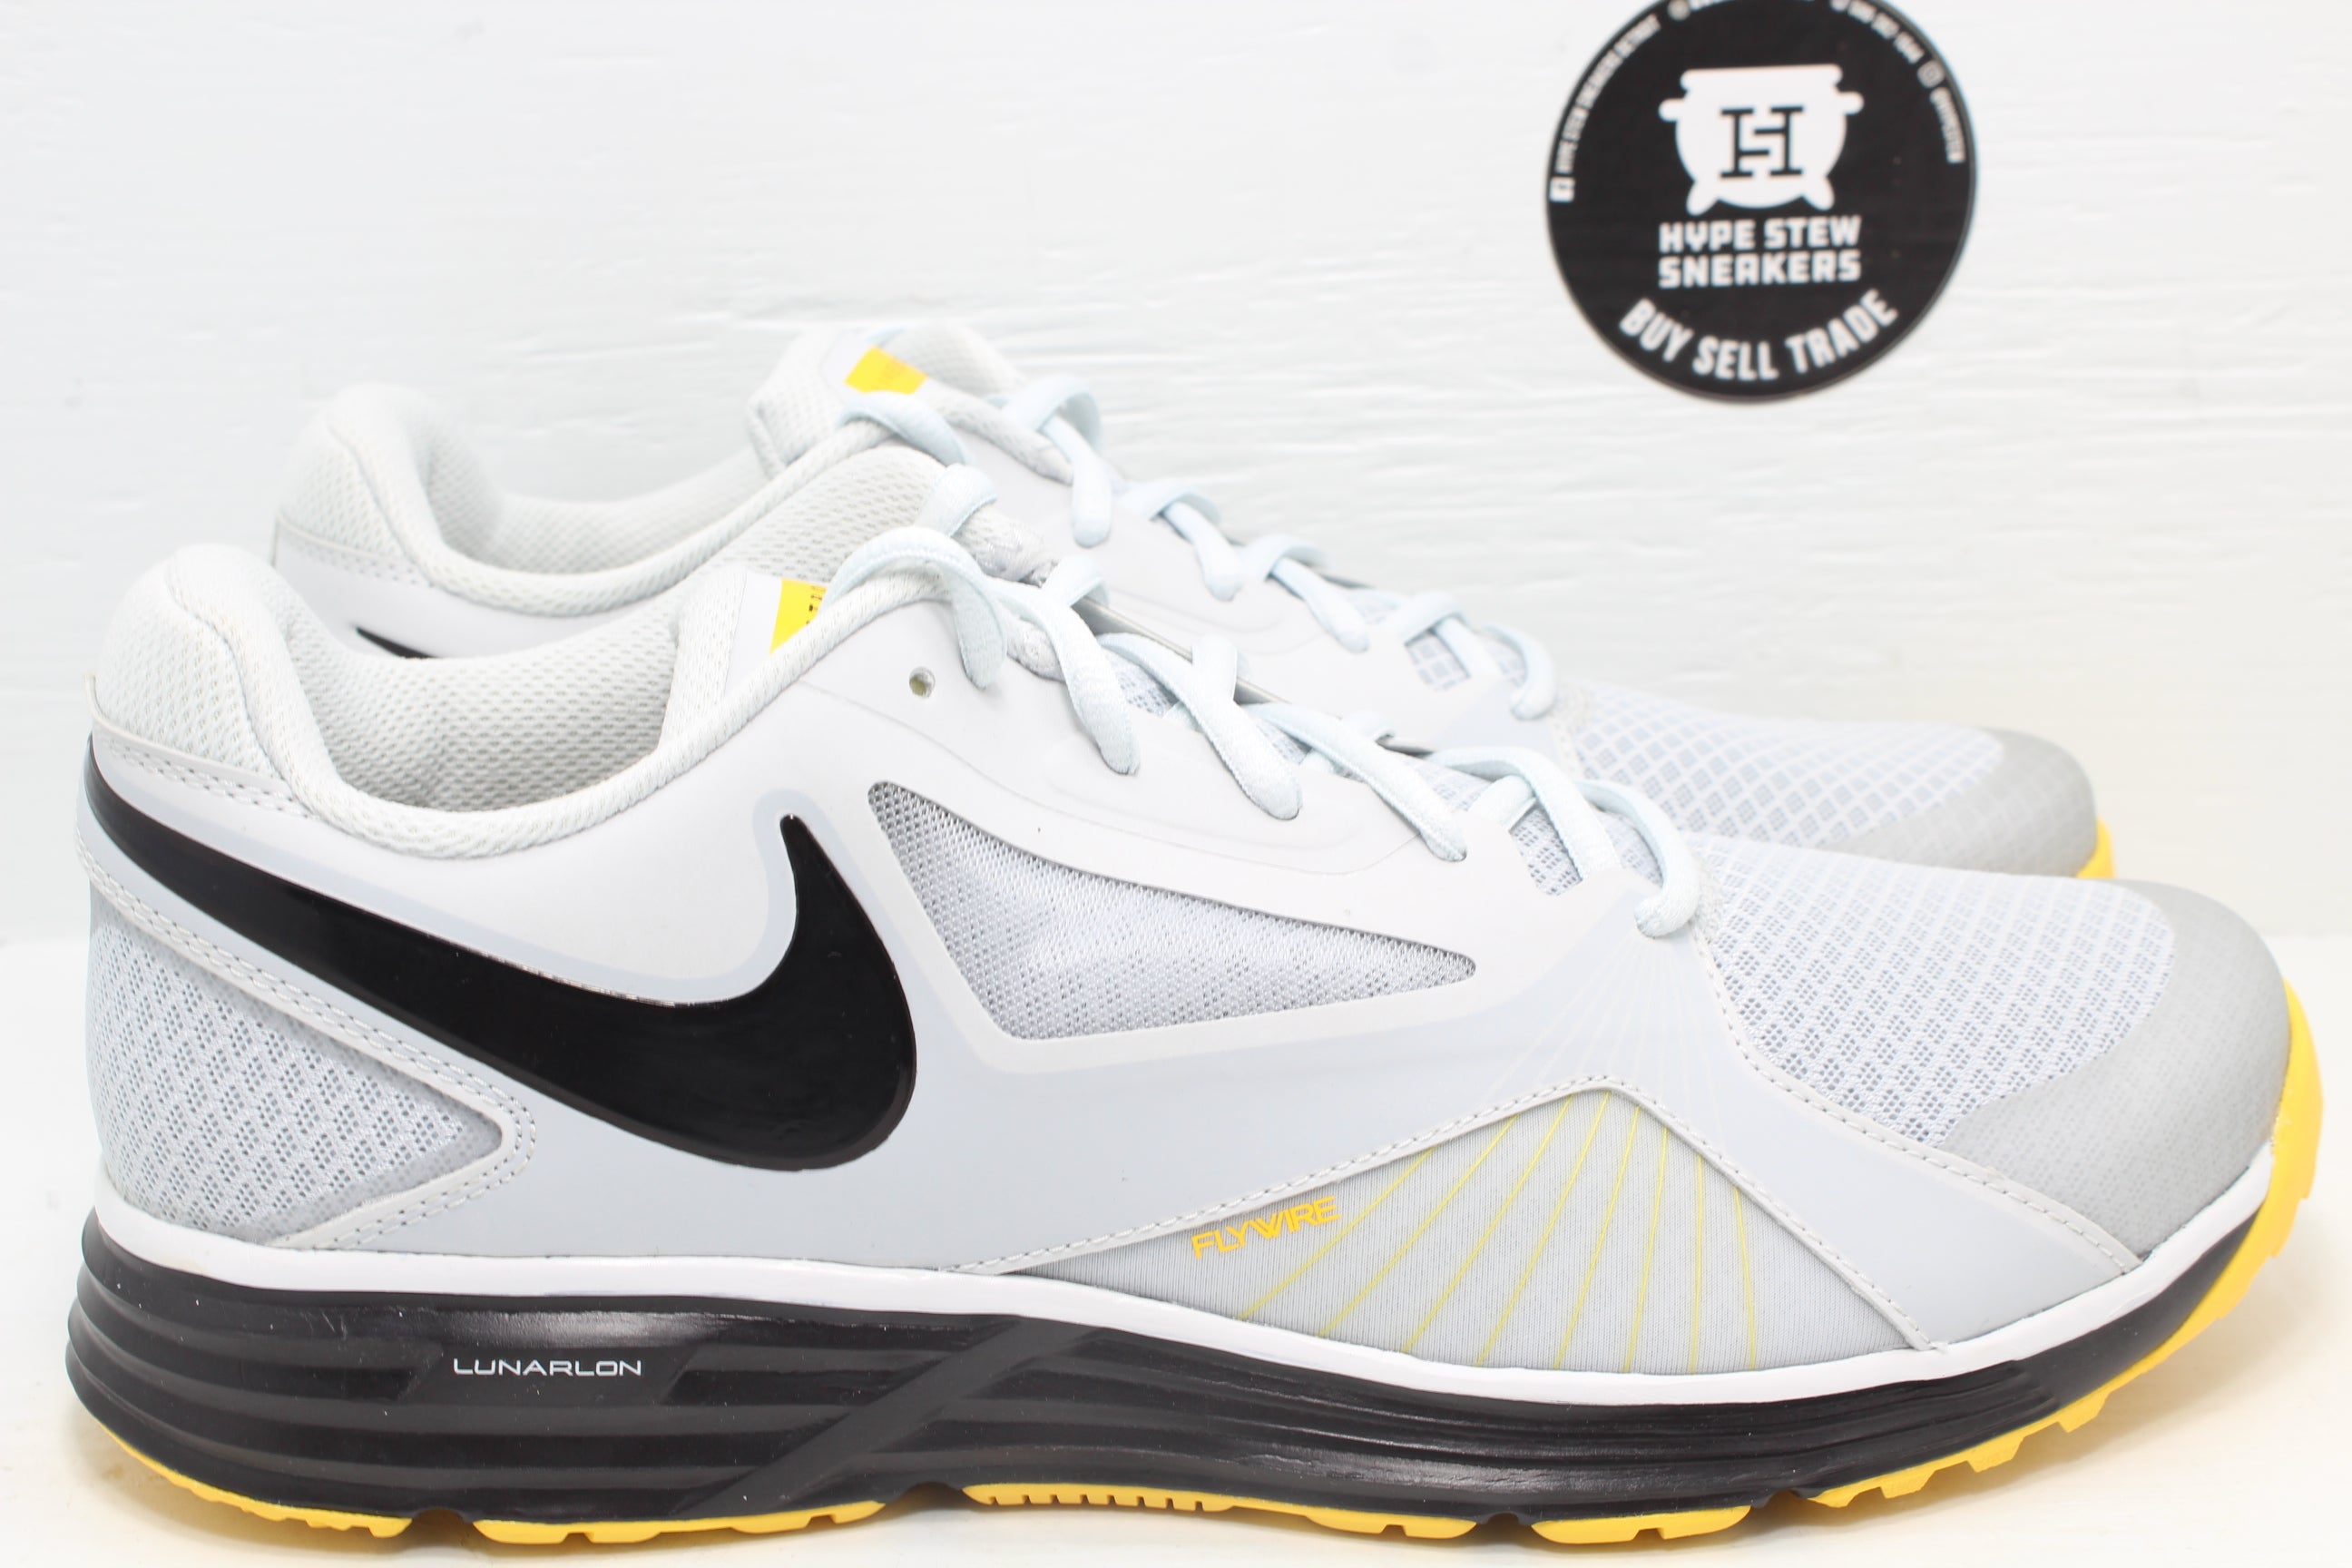 Nike Lunar Edge 15 Livestrong Pure Platinum Hype Sneakers